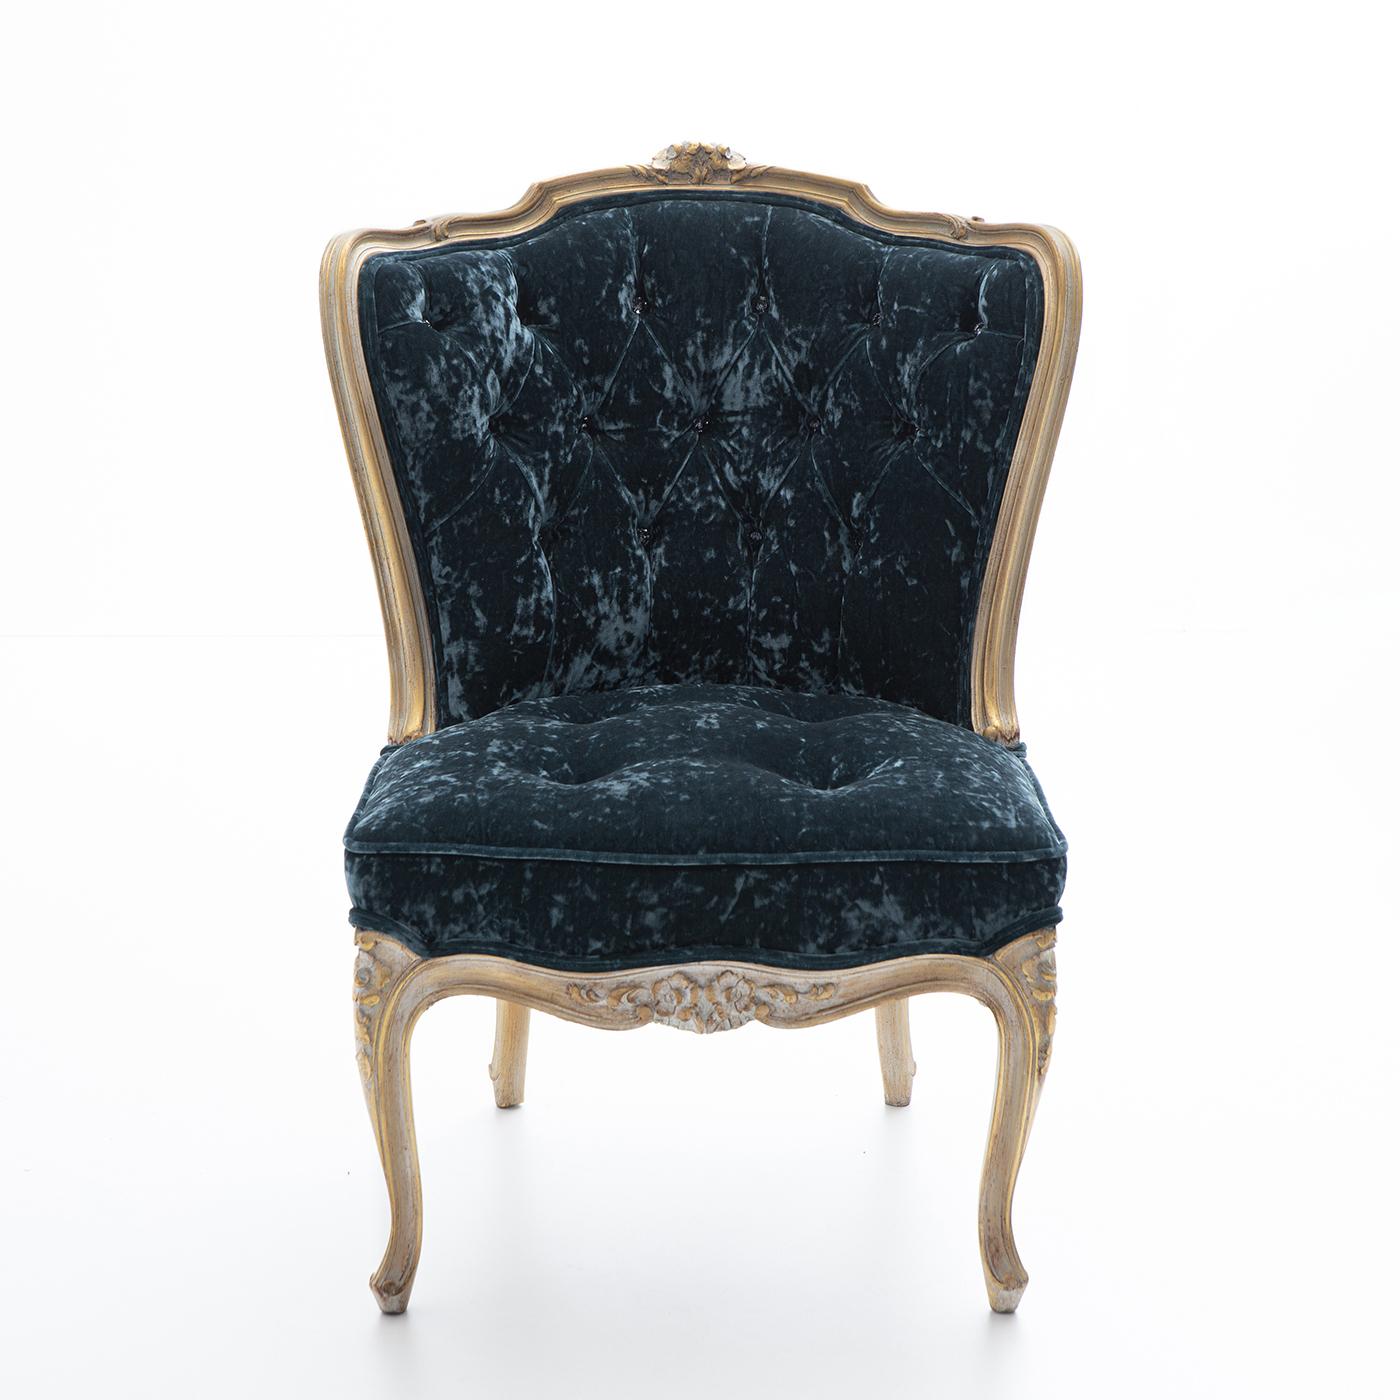 Exuding pure lavish allure, this exclusive chair matching the Louis XV style is a statement-making piece suiting classic interiors. The cabriole-style legs flaunt a gold-leaf coating enriched by a brown and white patina that extends to the profile